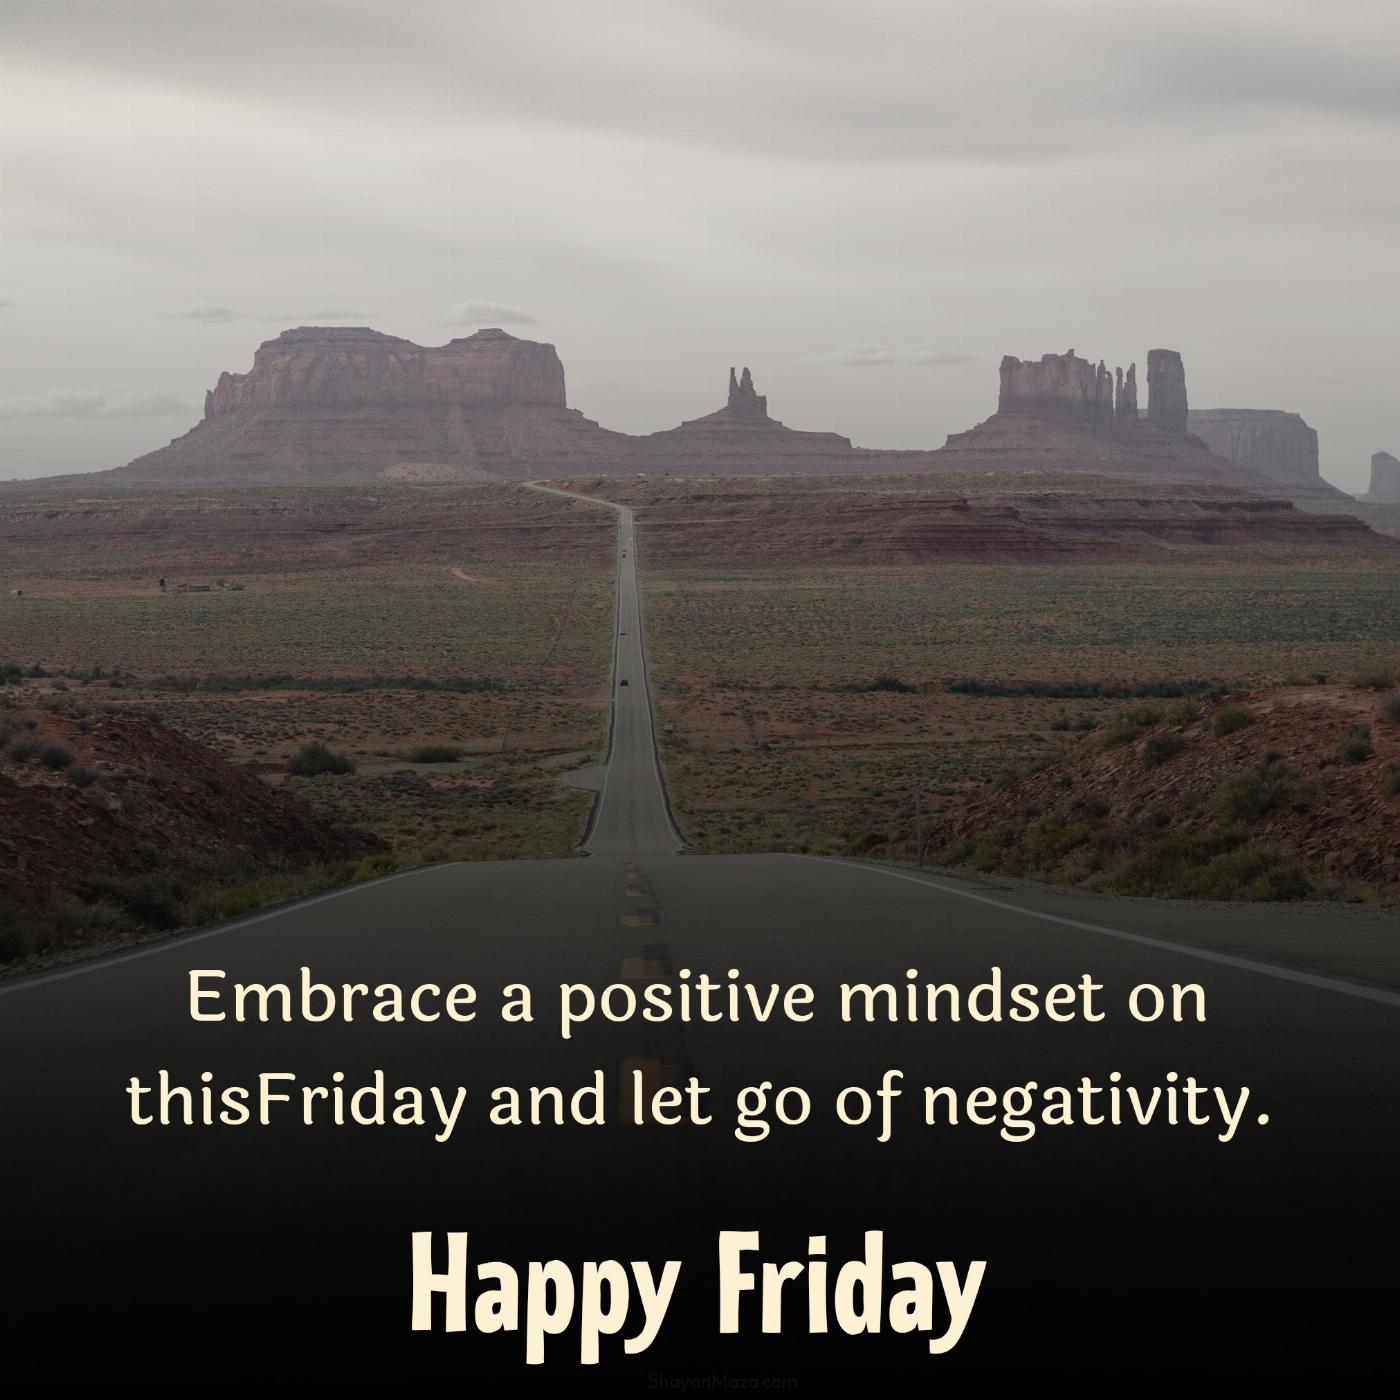 Embrace a positive mindset on thisFriday and let go of negativity